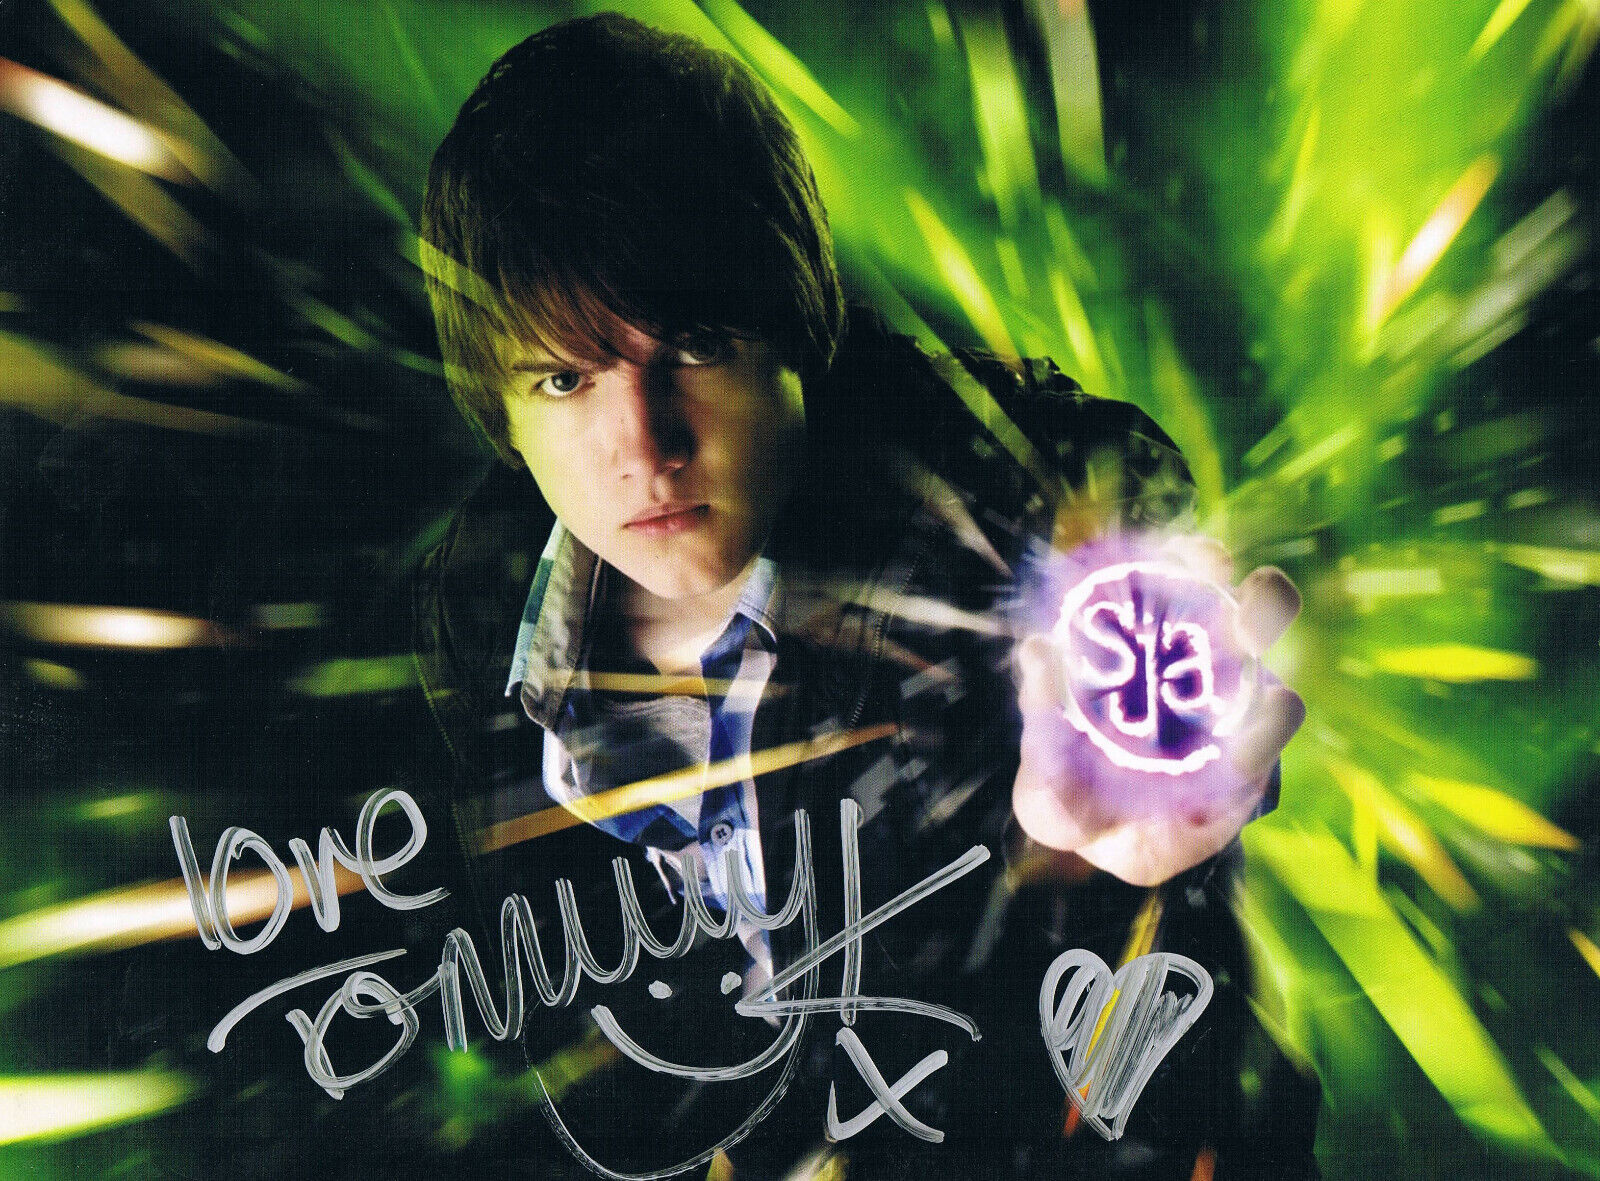 Tommy Knight 1993- genuine autograph Photo Poster painting 8x12